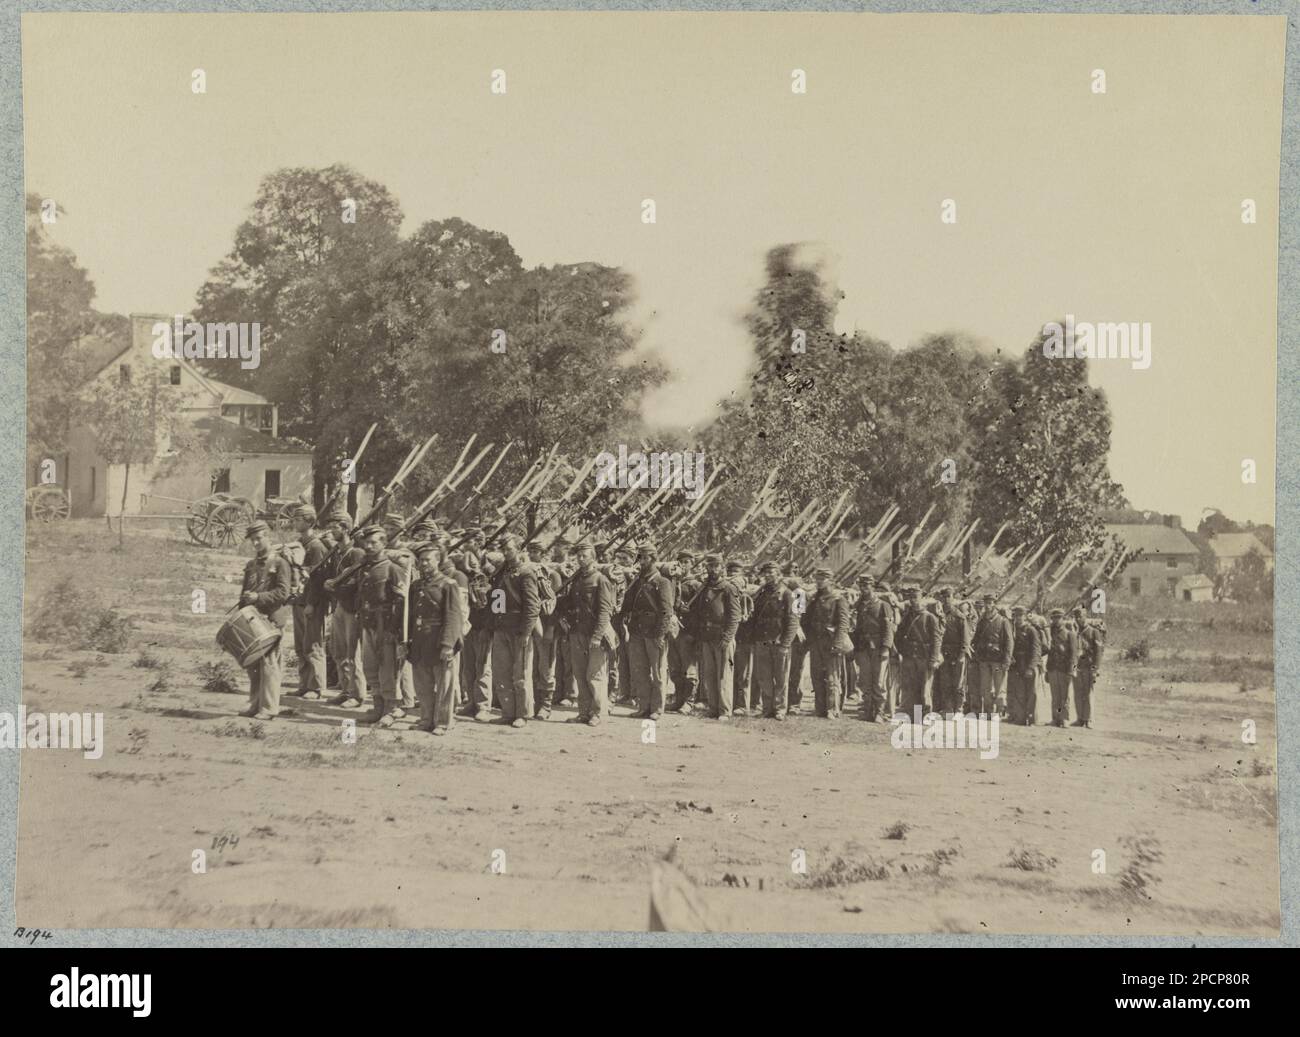 Company G, 22d New York State Militia near Harpers Ferry, Virginia, 1861 i.e.1862. No. B194, Title from item, Original negative in National Archives Record Group 111: Records of the Office of the Chief Signal Officer, 1860-1985, Series: Mathew Brady Photographs of Civil War-Era Personalities and Scenes, 1921-1940, Item: Company of Infantry on Parade near Harpers Ferry, Va, Gift; Col. Godwin Ordway; 1948, Published in: History of the Twenty-second regiment of the National guard of the state of New York .. / by General George W. Wingate. New York: E. W. Dayton [1896], p. 121. New York (State), M Stock Photo